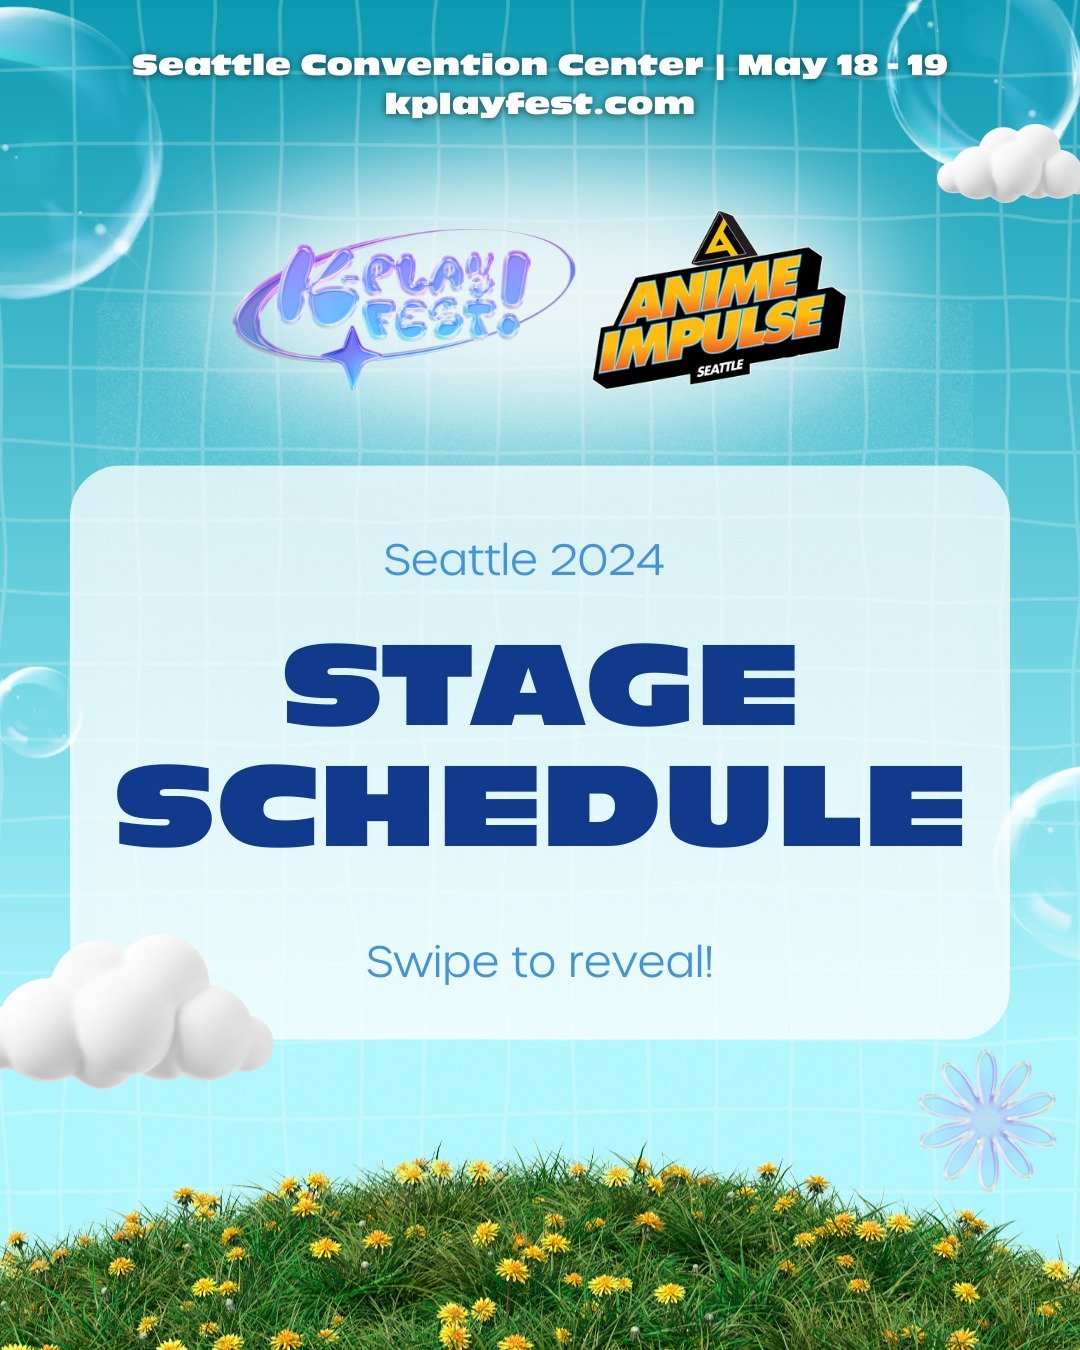 Remember me, sting like a BEE 🐝 and take a moment to check out our STAGE SCHEDULE! We will be having a COLLAB STAGE with the one and only @animeimpulse 💛 We&rsquo;re so excited to BATTER UP ⚾ with these performances 😉 and special programming! 🕺

